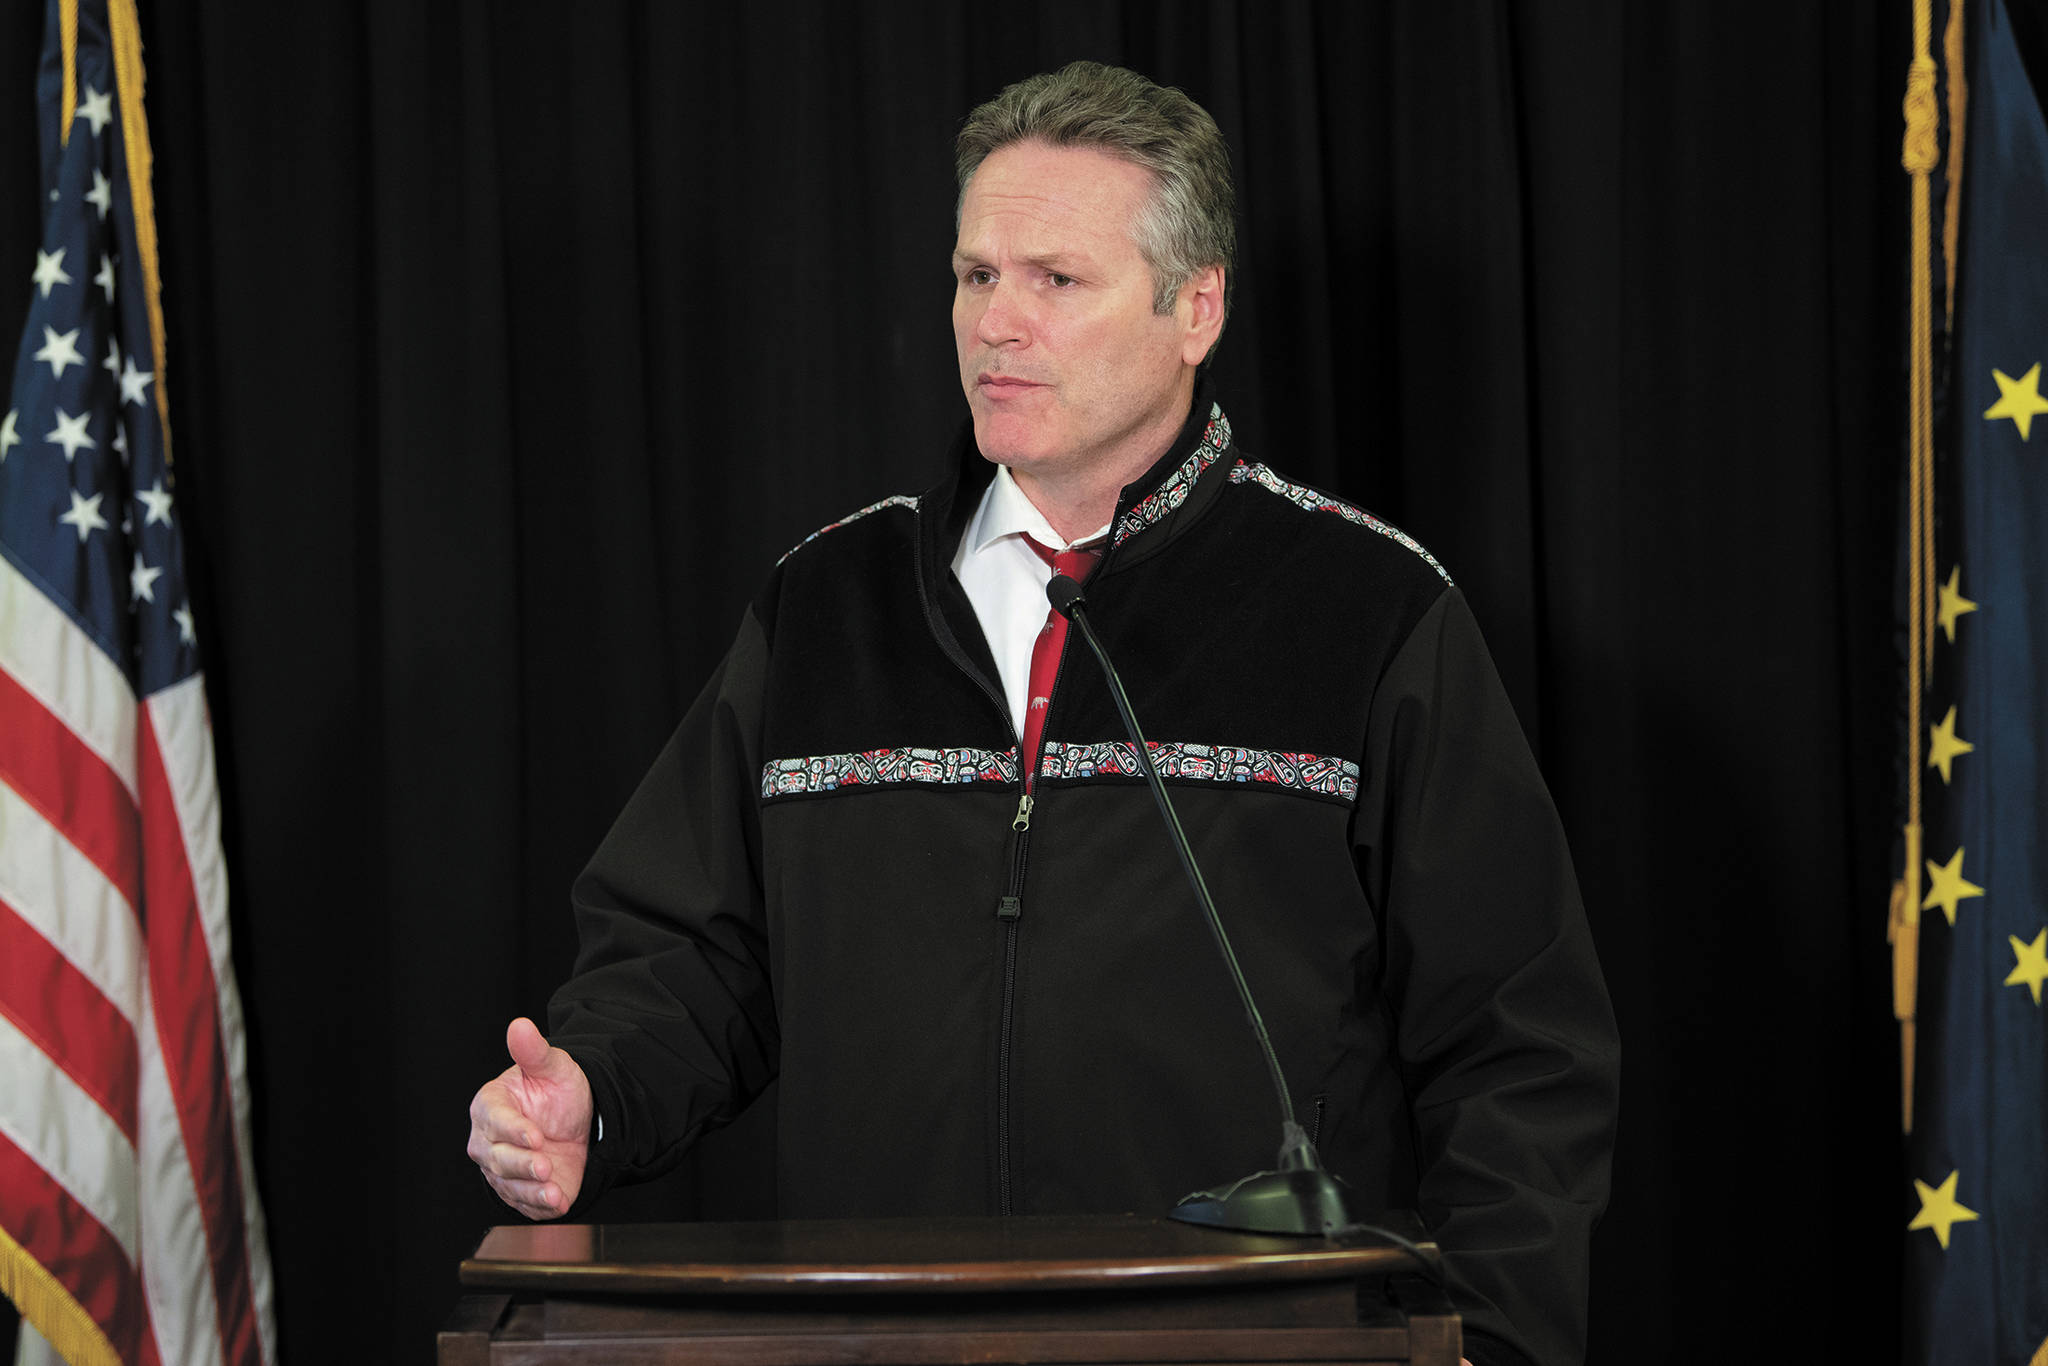 Gov. Mike Dunleavy speaks during a Friday, April 10, 2020 press conference in the Atwood Building in Anchorage, Alaska. (Photo courtesy Office of the Governor)